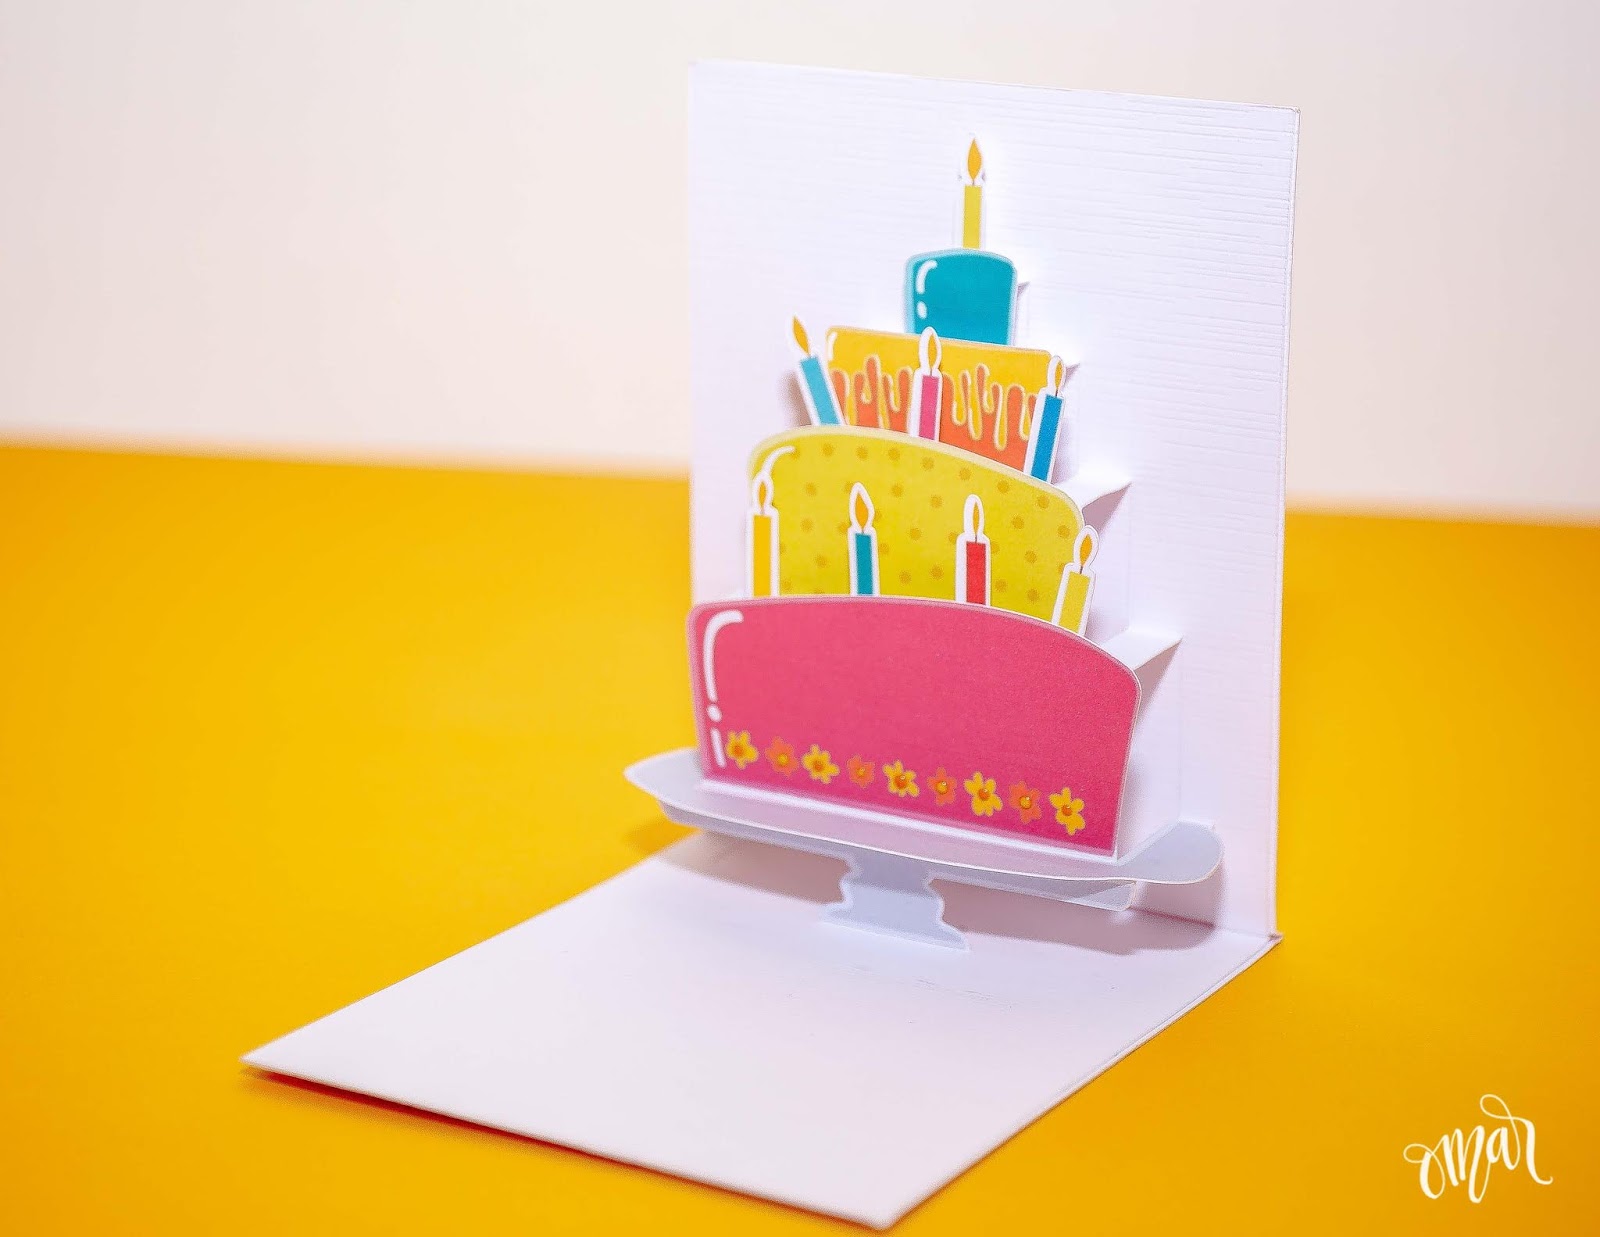 Download Awesome SVGs: Layered Cake, Pop Up Bithday Card